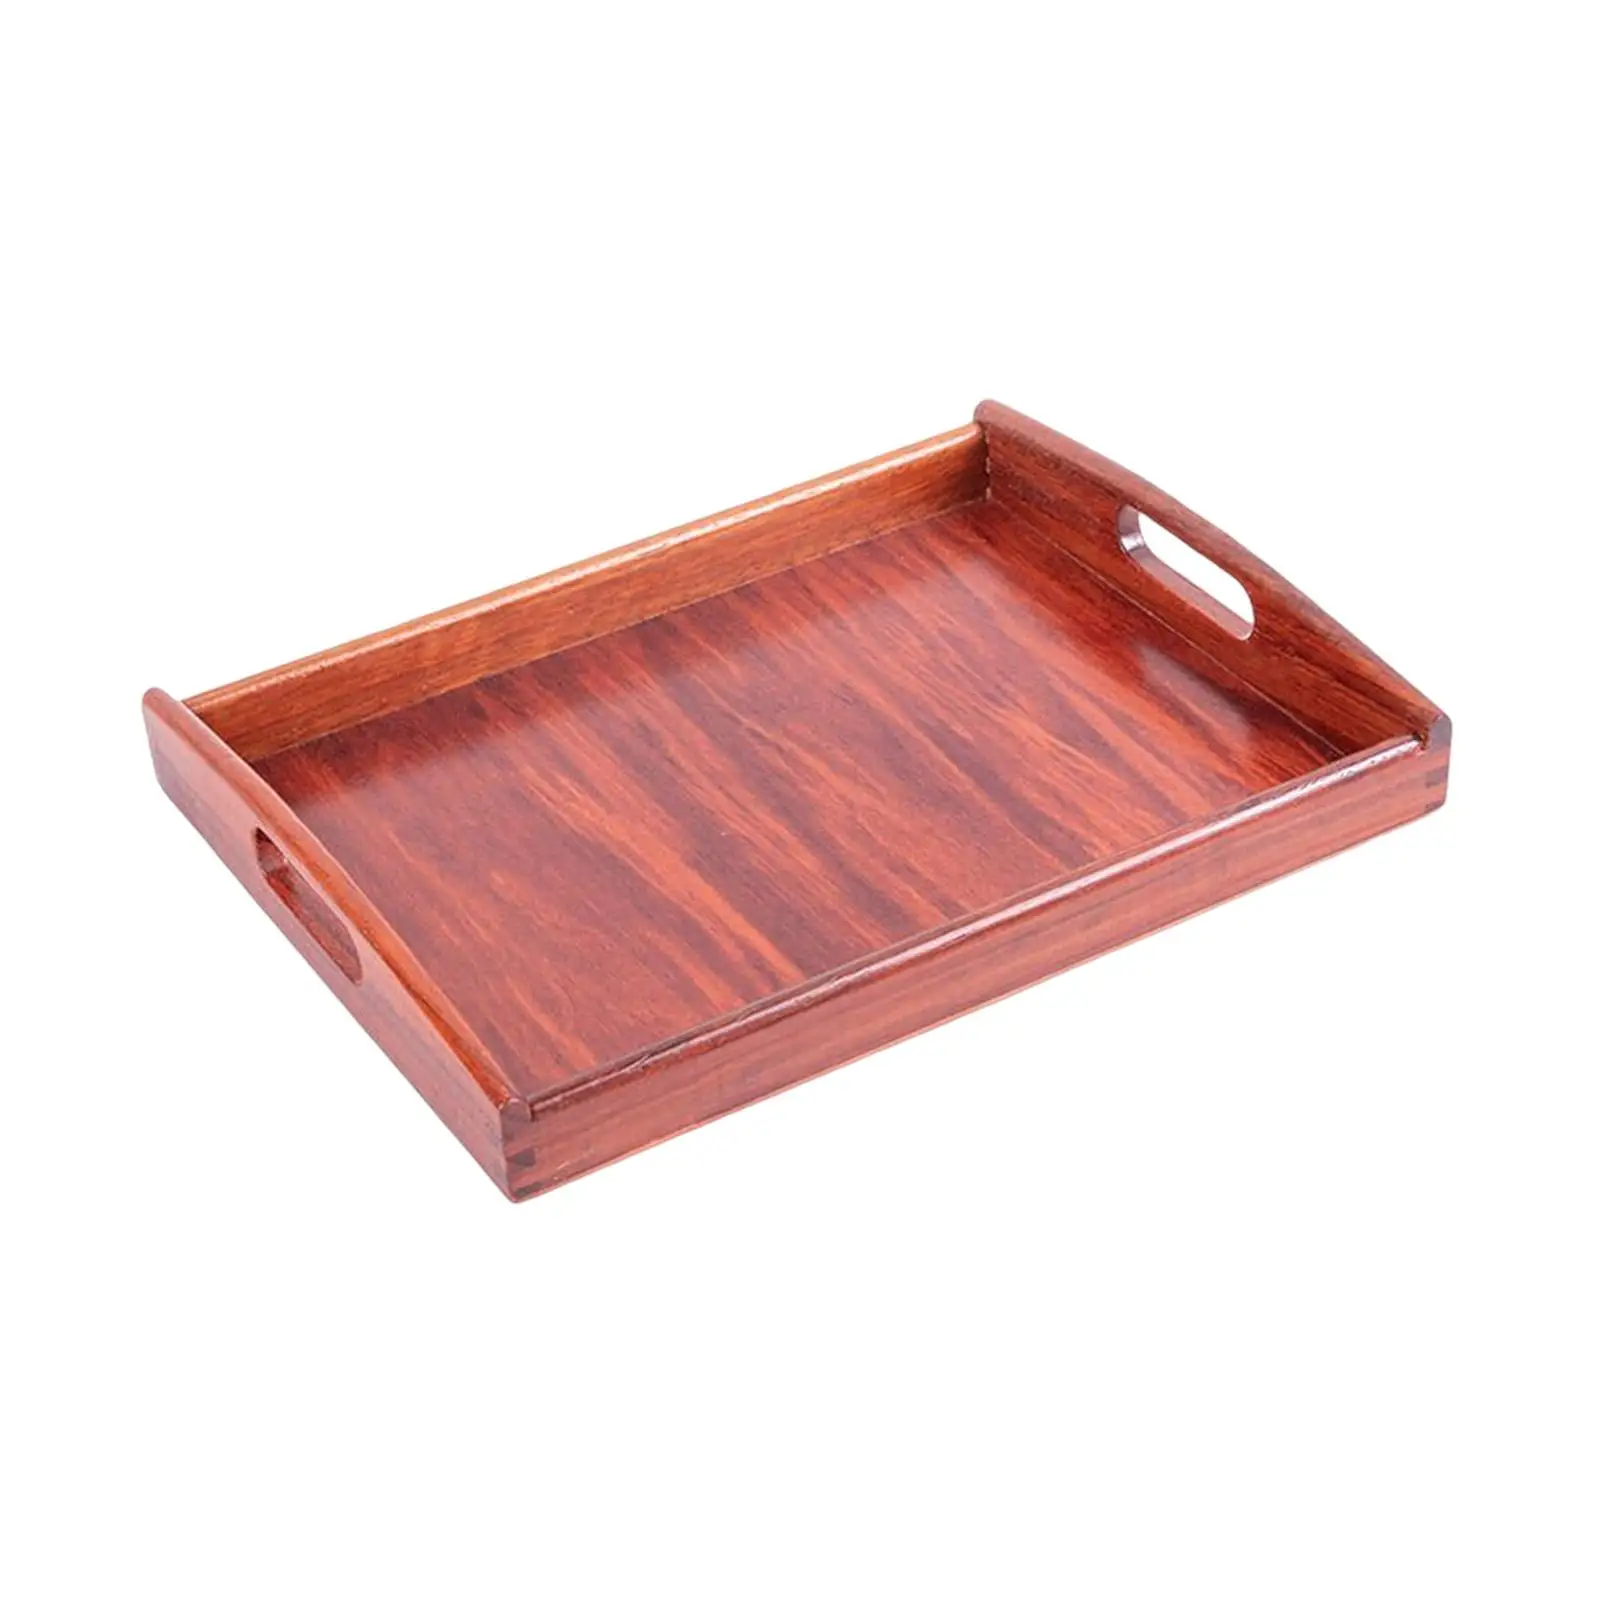 Decorative Snack Tray Pantry Tea Drink Platter Wood Plate Rectangular Serving Tray for Coffee Table Lunch Patio Breakfast in Bed